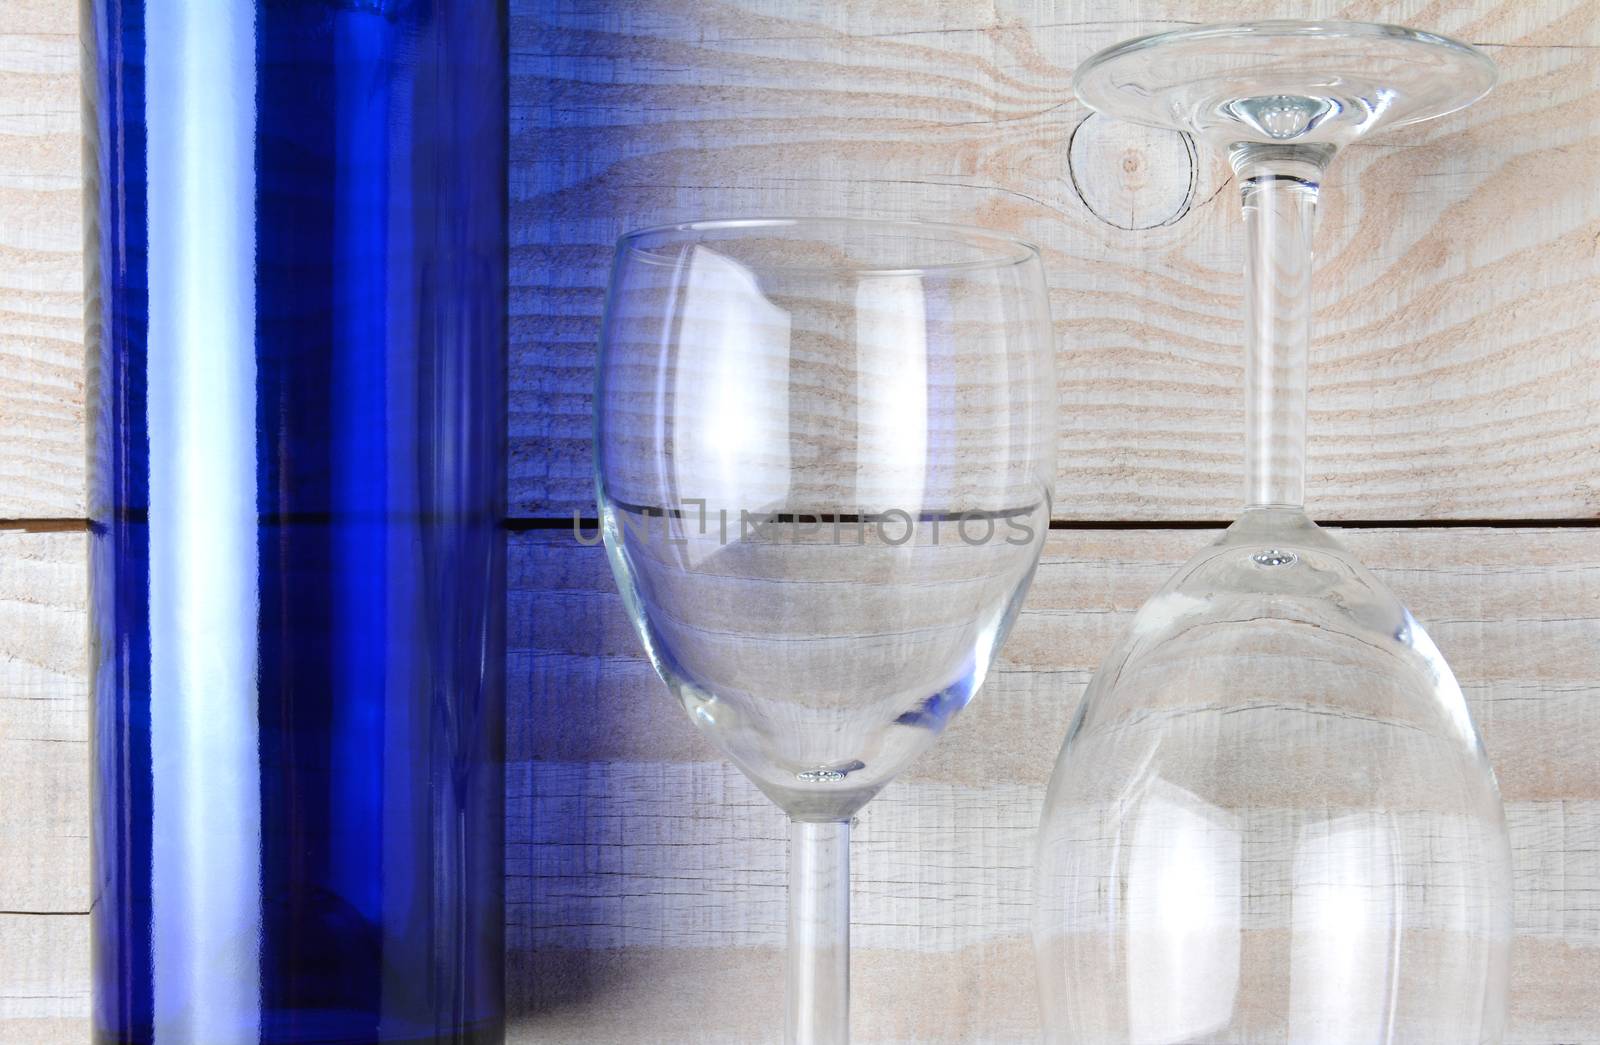 Wine Glasses and Blue Bottle by sCukrov